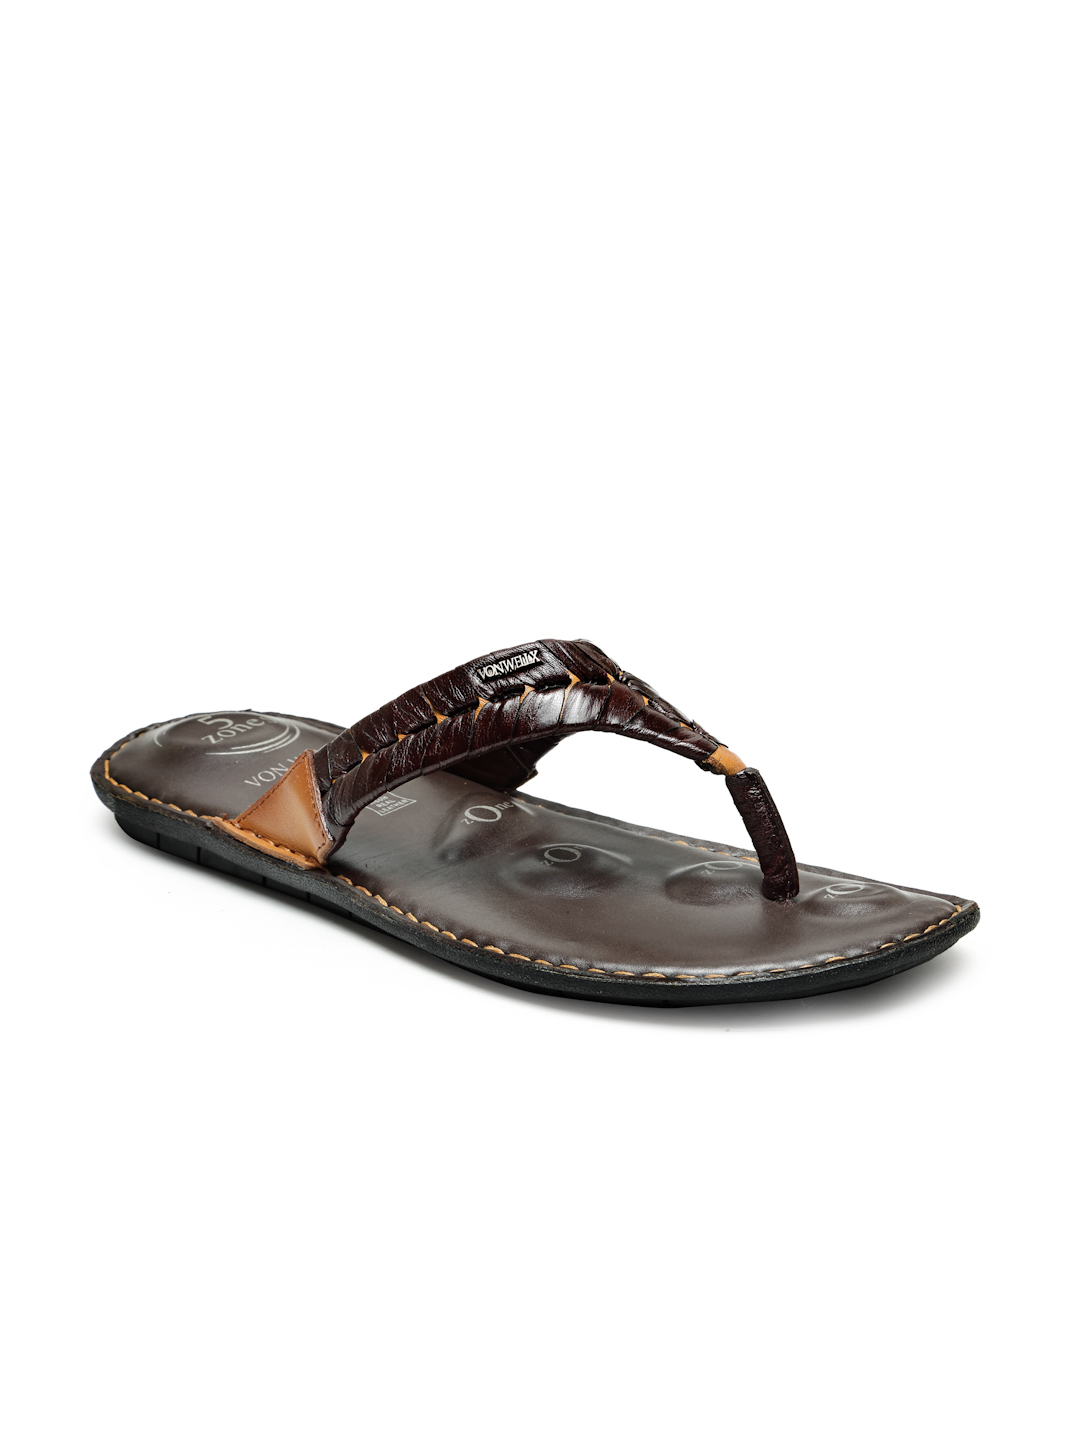 Buy Von Wellx Germany Comfort Men's Tan Slippers Alonso Online in Colombo